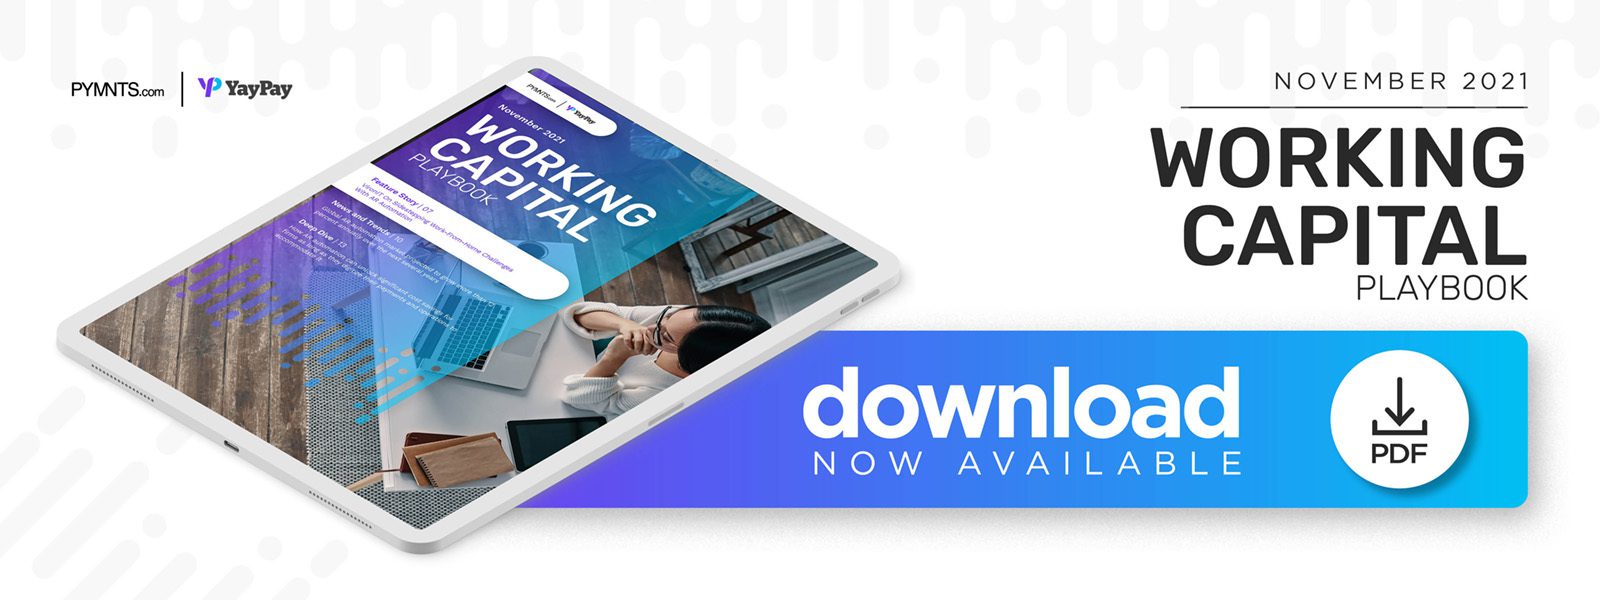 Download the Working Capital Playbook, Accounts receivable guide to AR automation and AR digitization